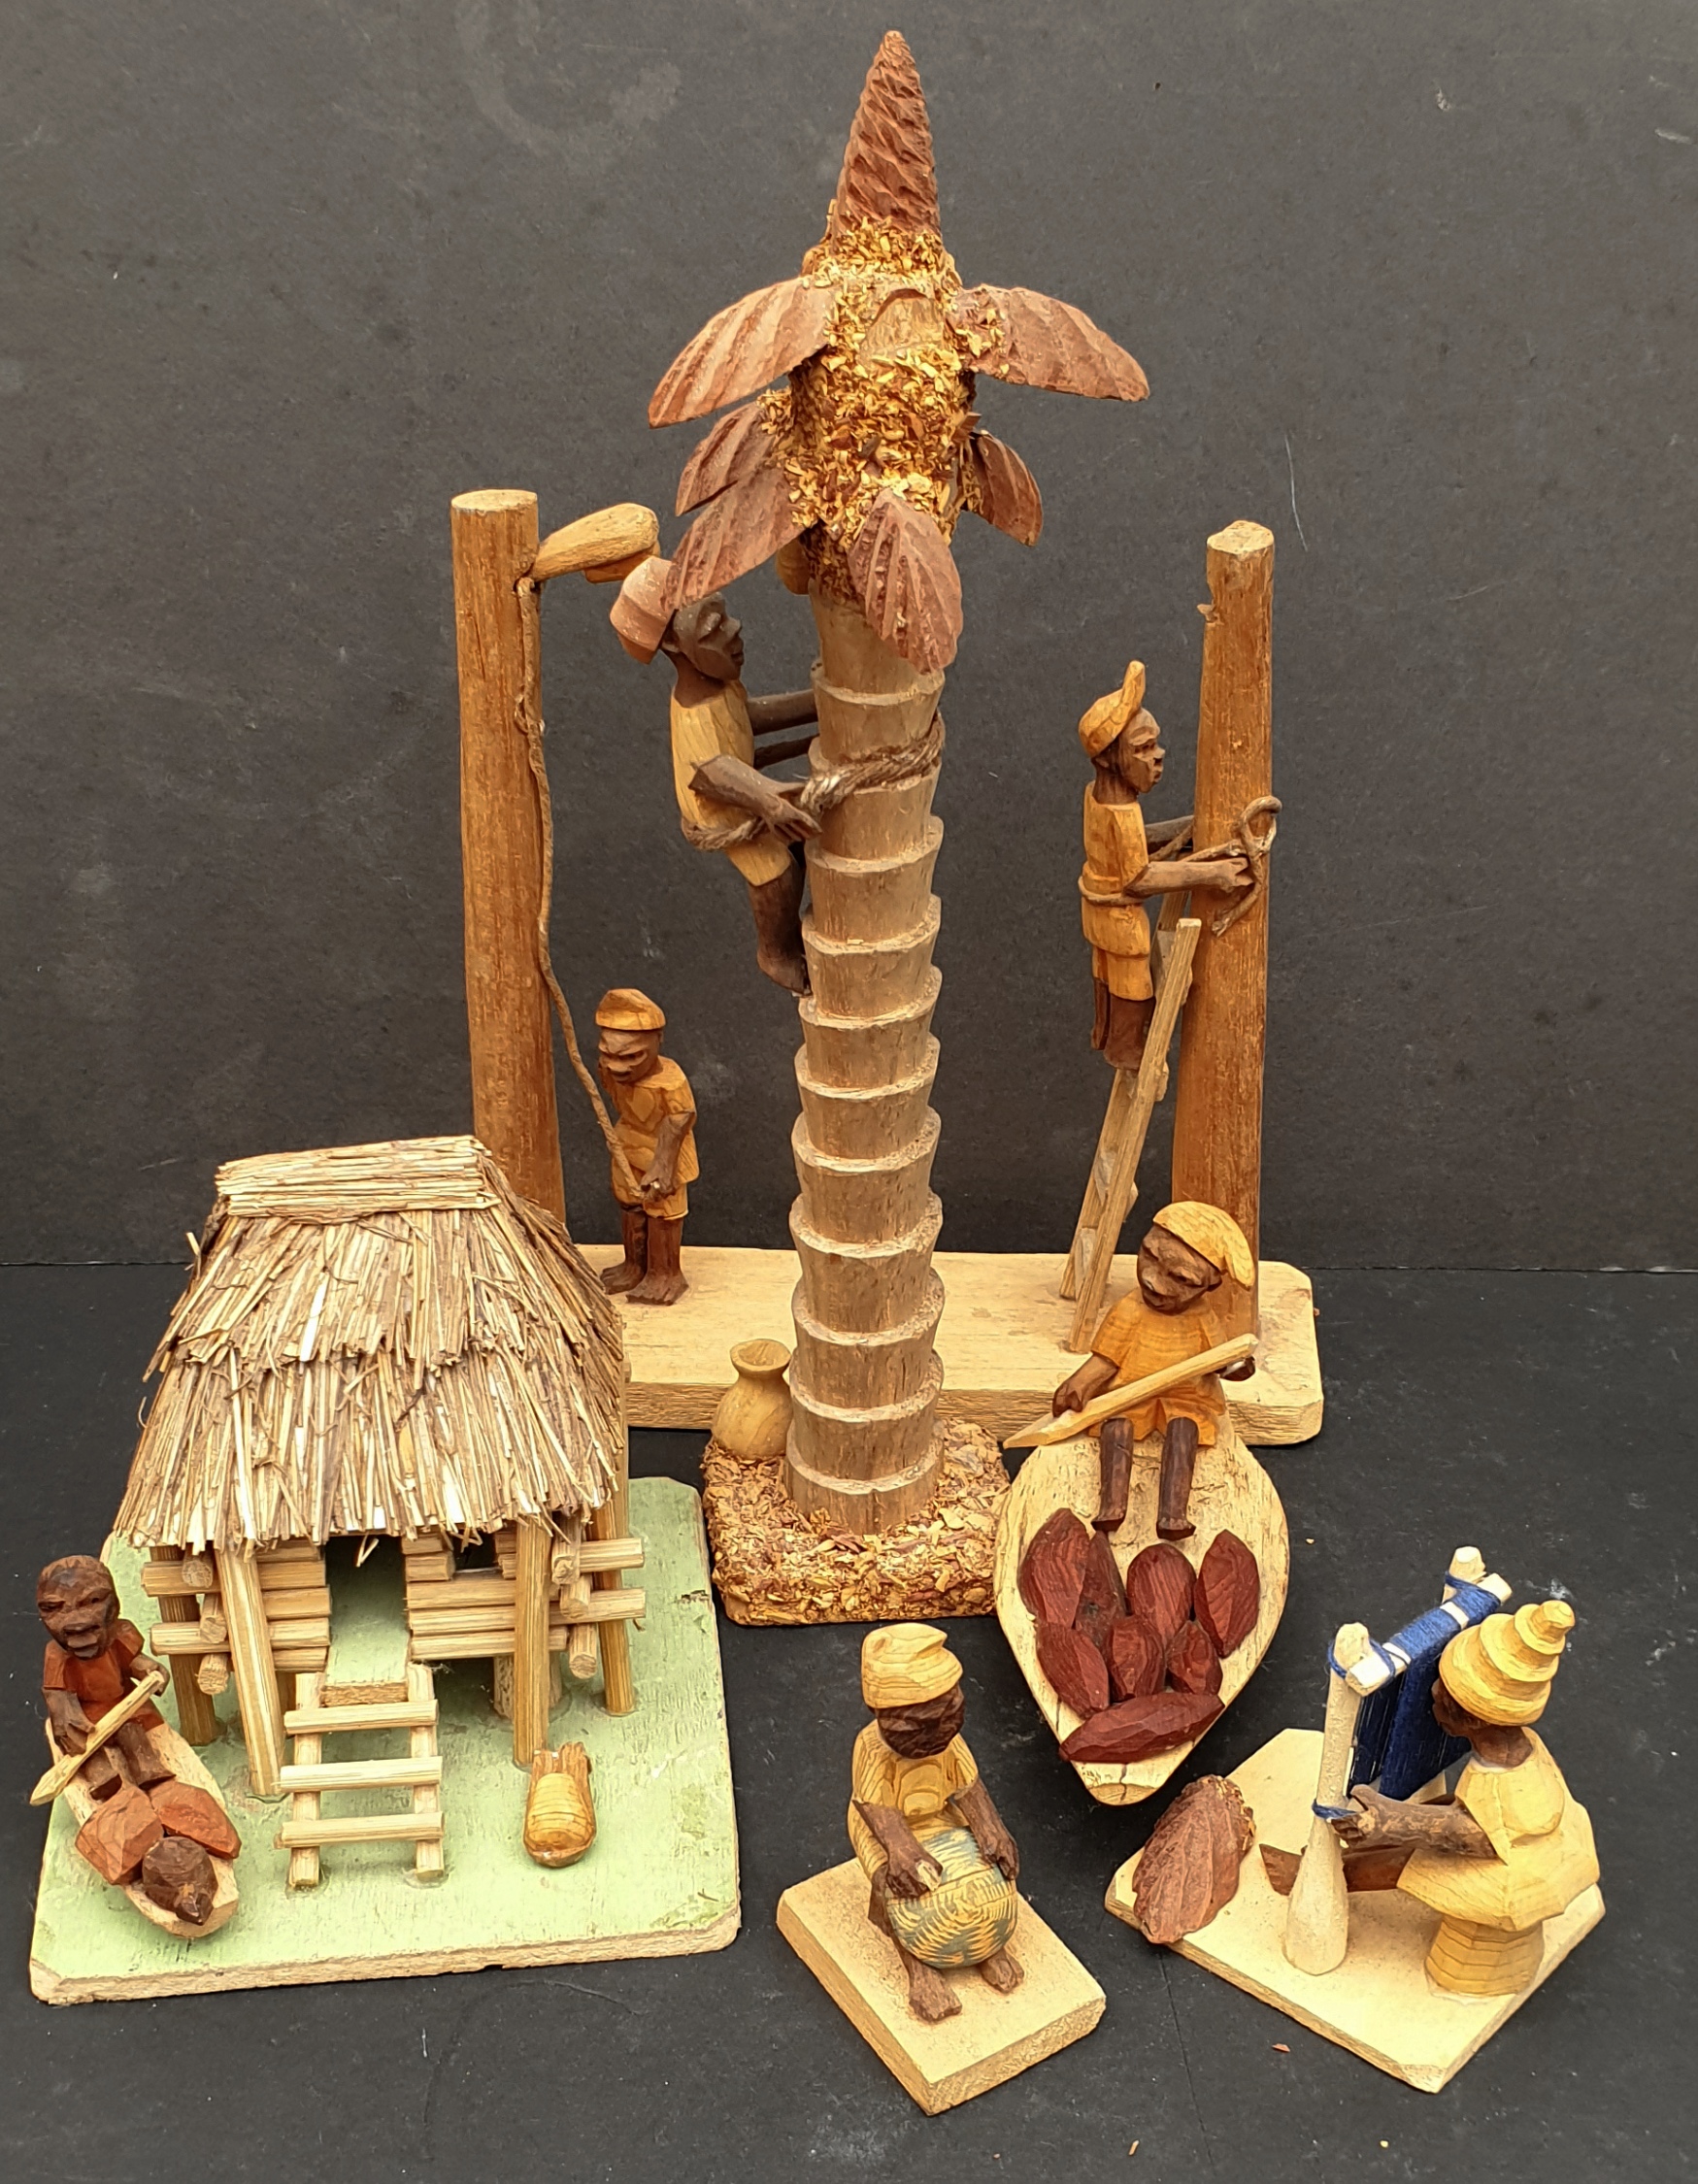 Vintage Retro Kitsch 6 x Hand Carved Wood East African Figures and Village Scene. The tallest